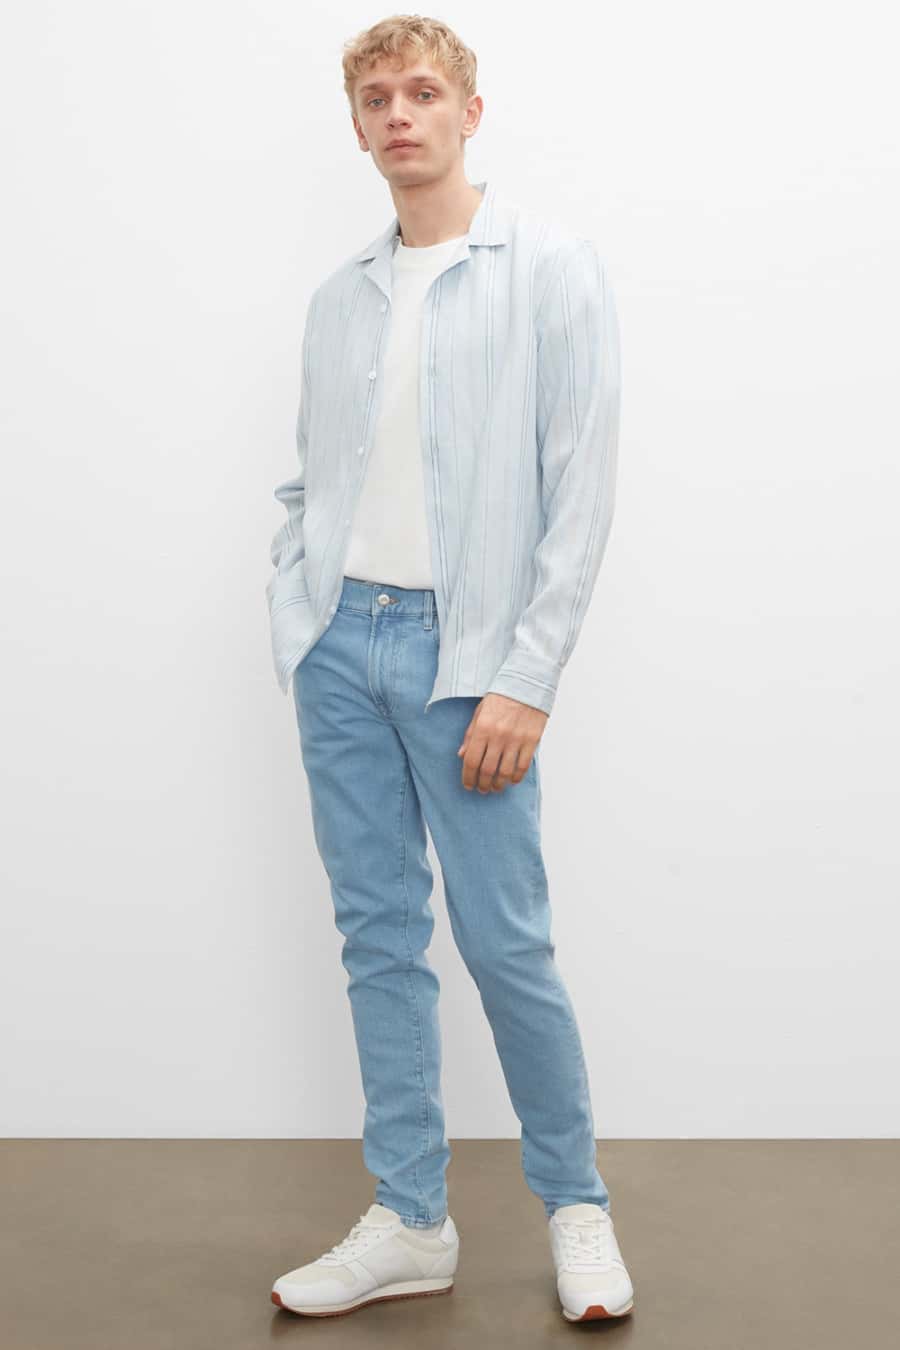 Men's light blue jeans, white T-shirt, sky blue vertical striped shirt and white sneakers outfit